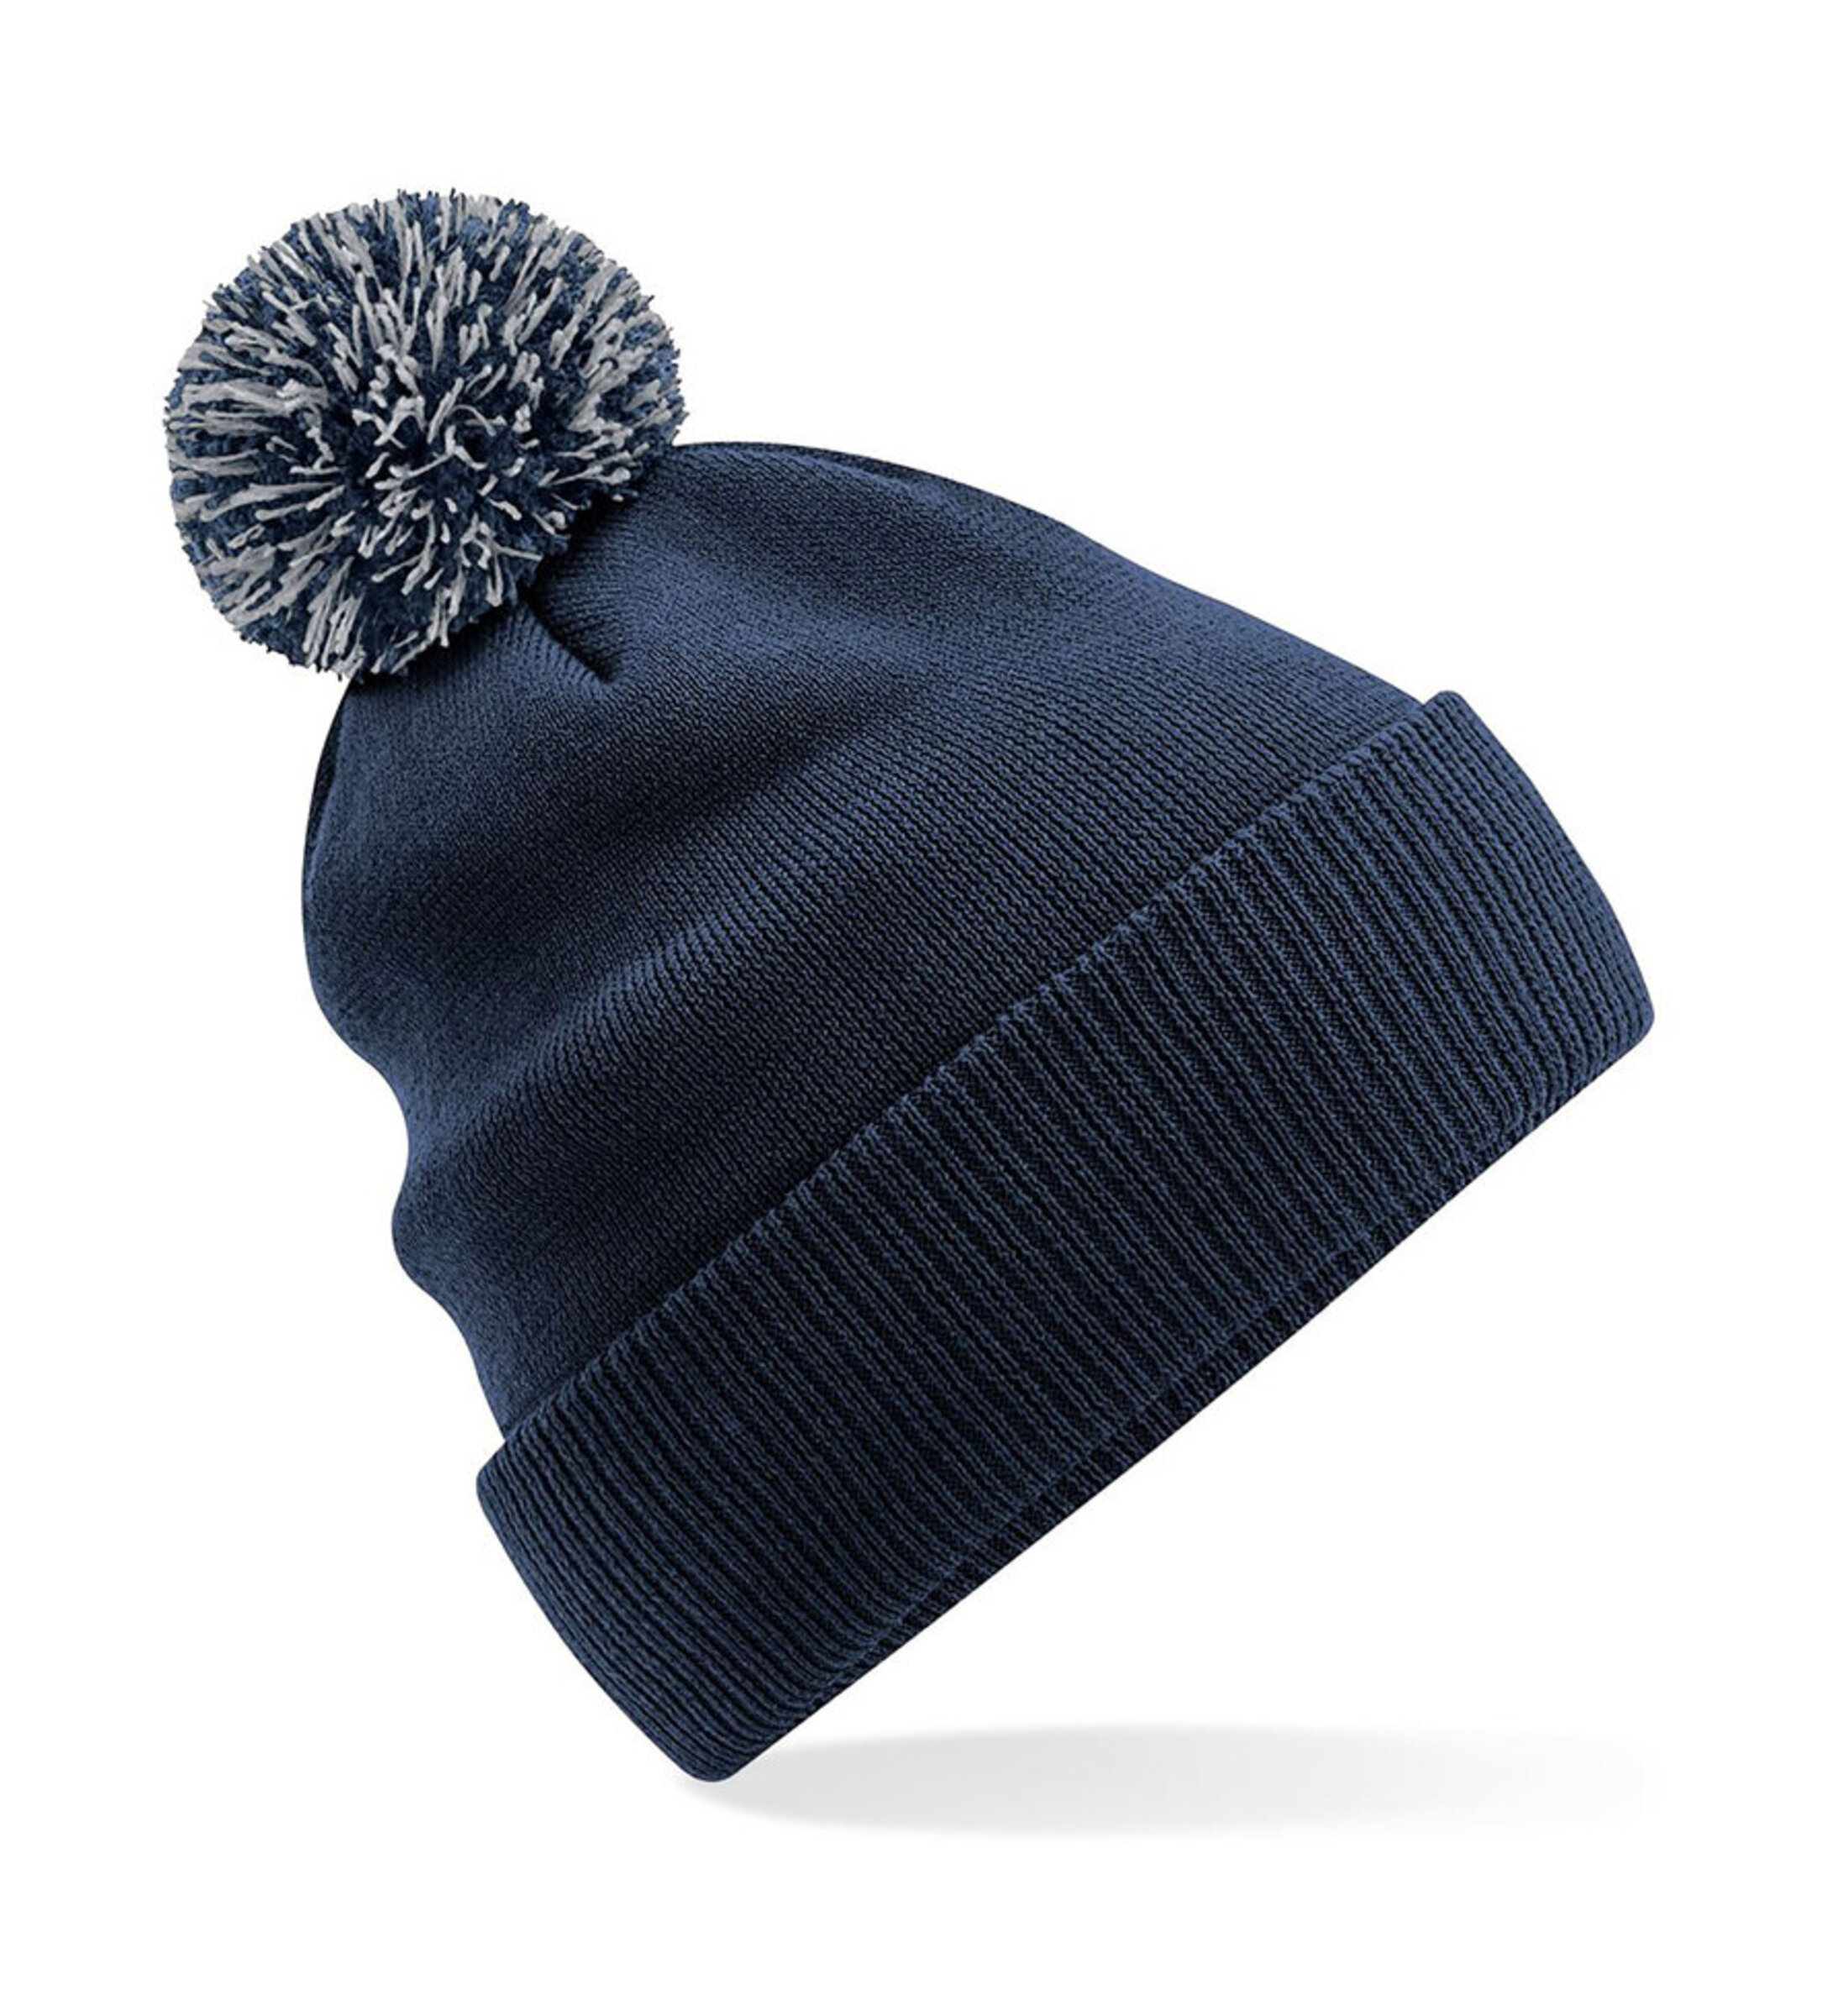 Beechfield Recycled Snowstar Beanie - French Navy/Light Grey - One Size